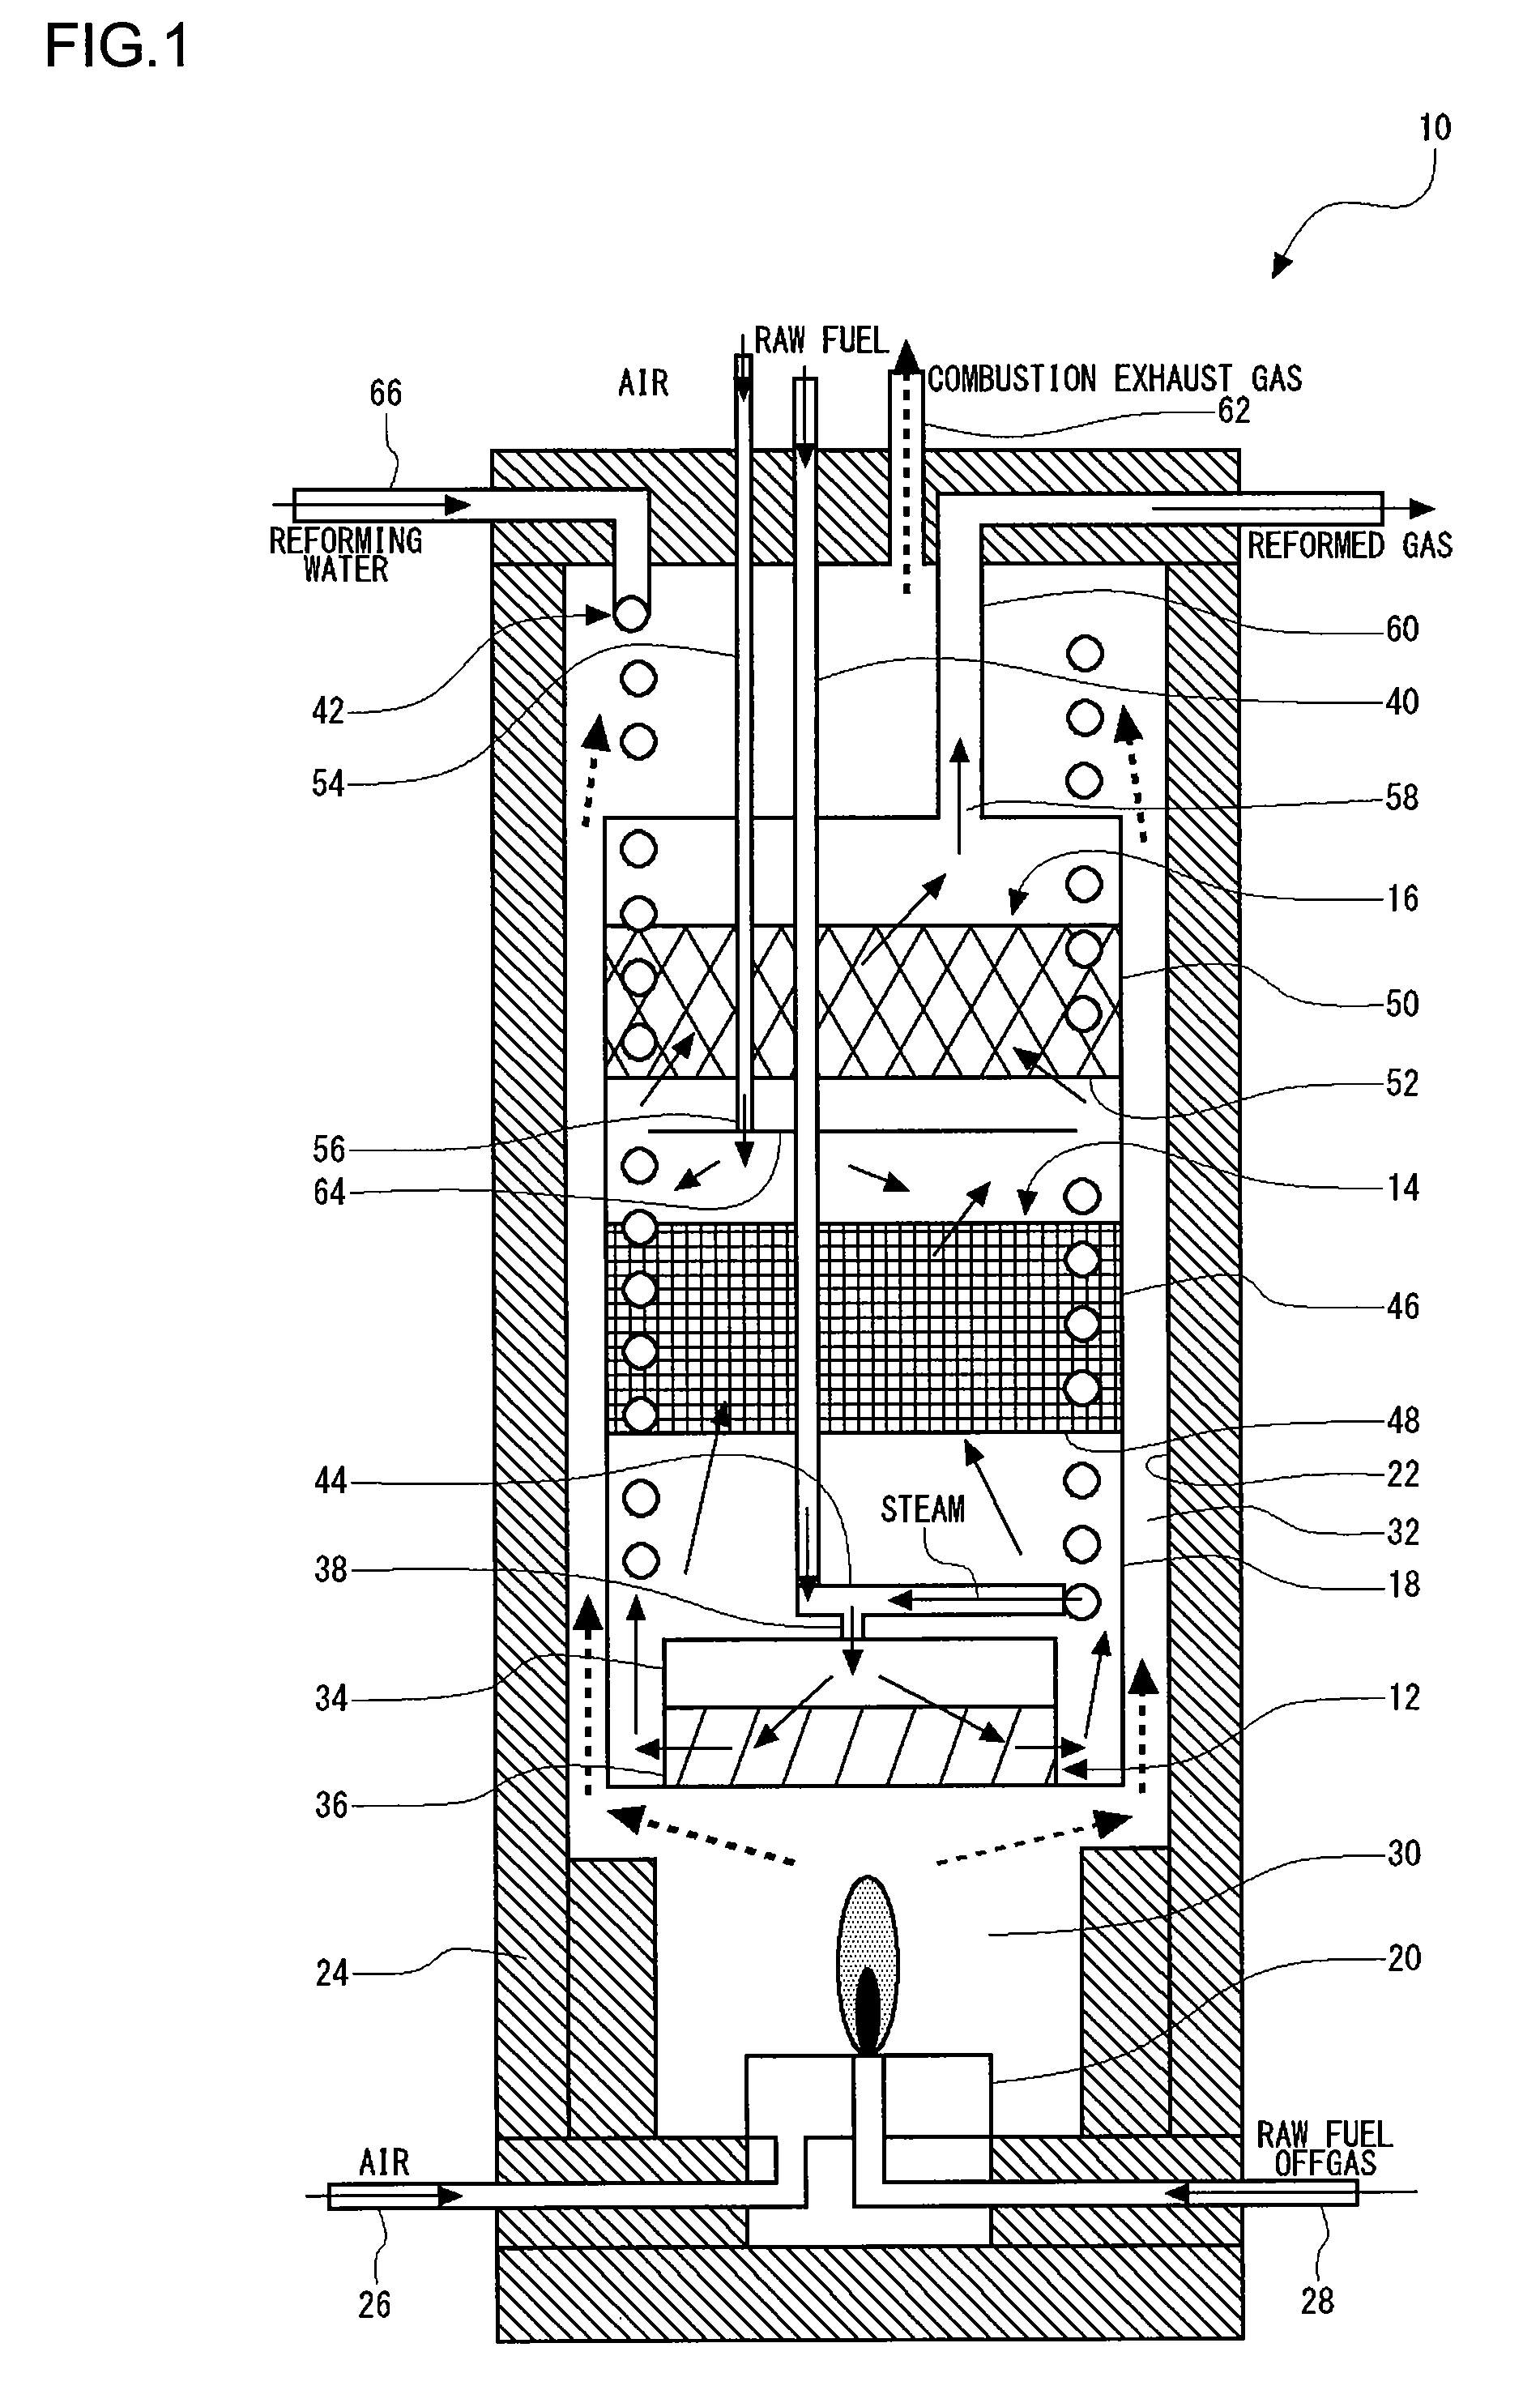 Reforming apparatus for fuel cell